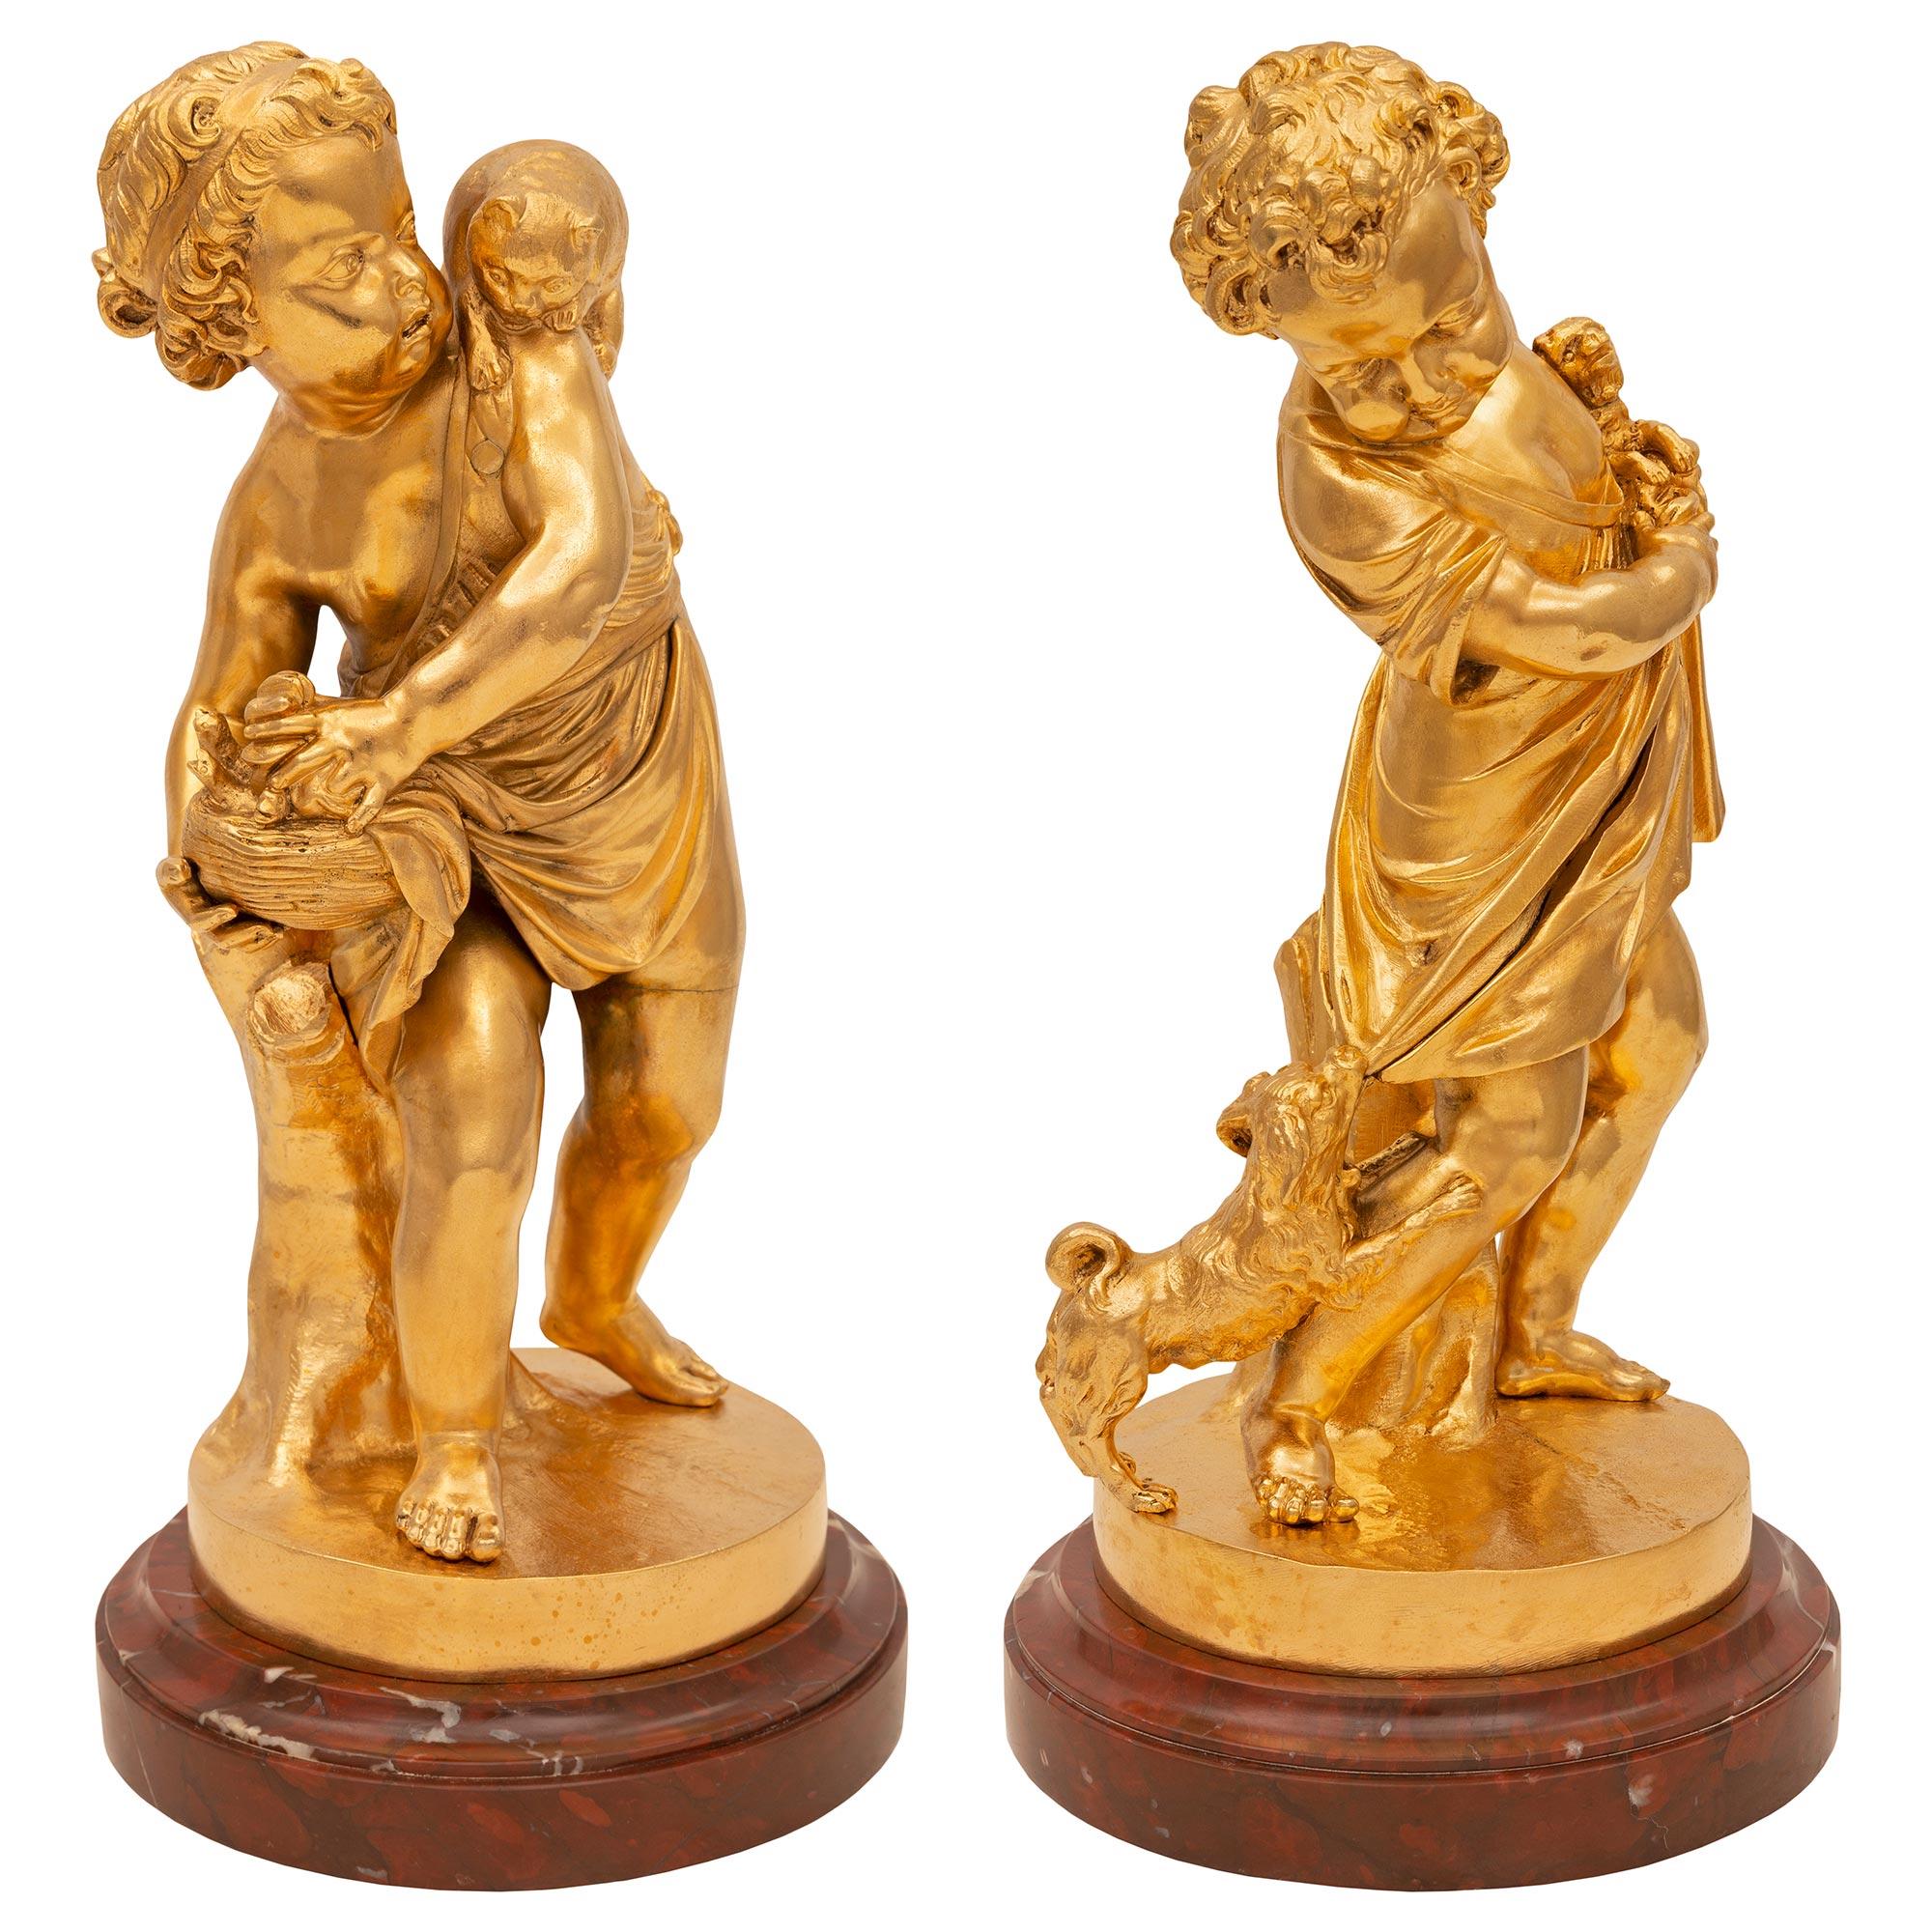 An exceptional and most charming true pair of French 19th century Louis XVI st. ormolu and Rouge Griotte marble statues. Each statue is raised by a Fine circular Rouge Griotte marble base with an elegant wrap around mottled border. The statues above